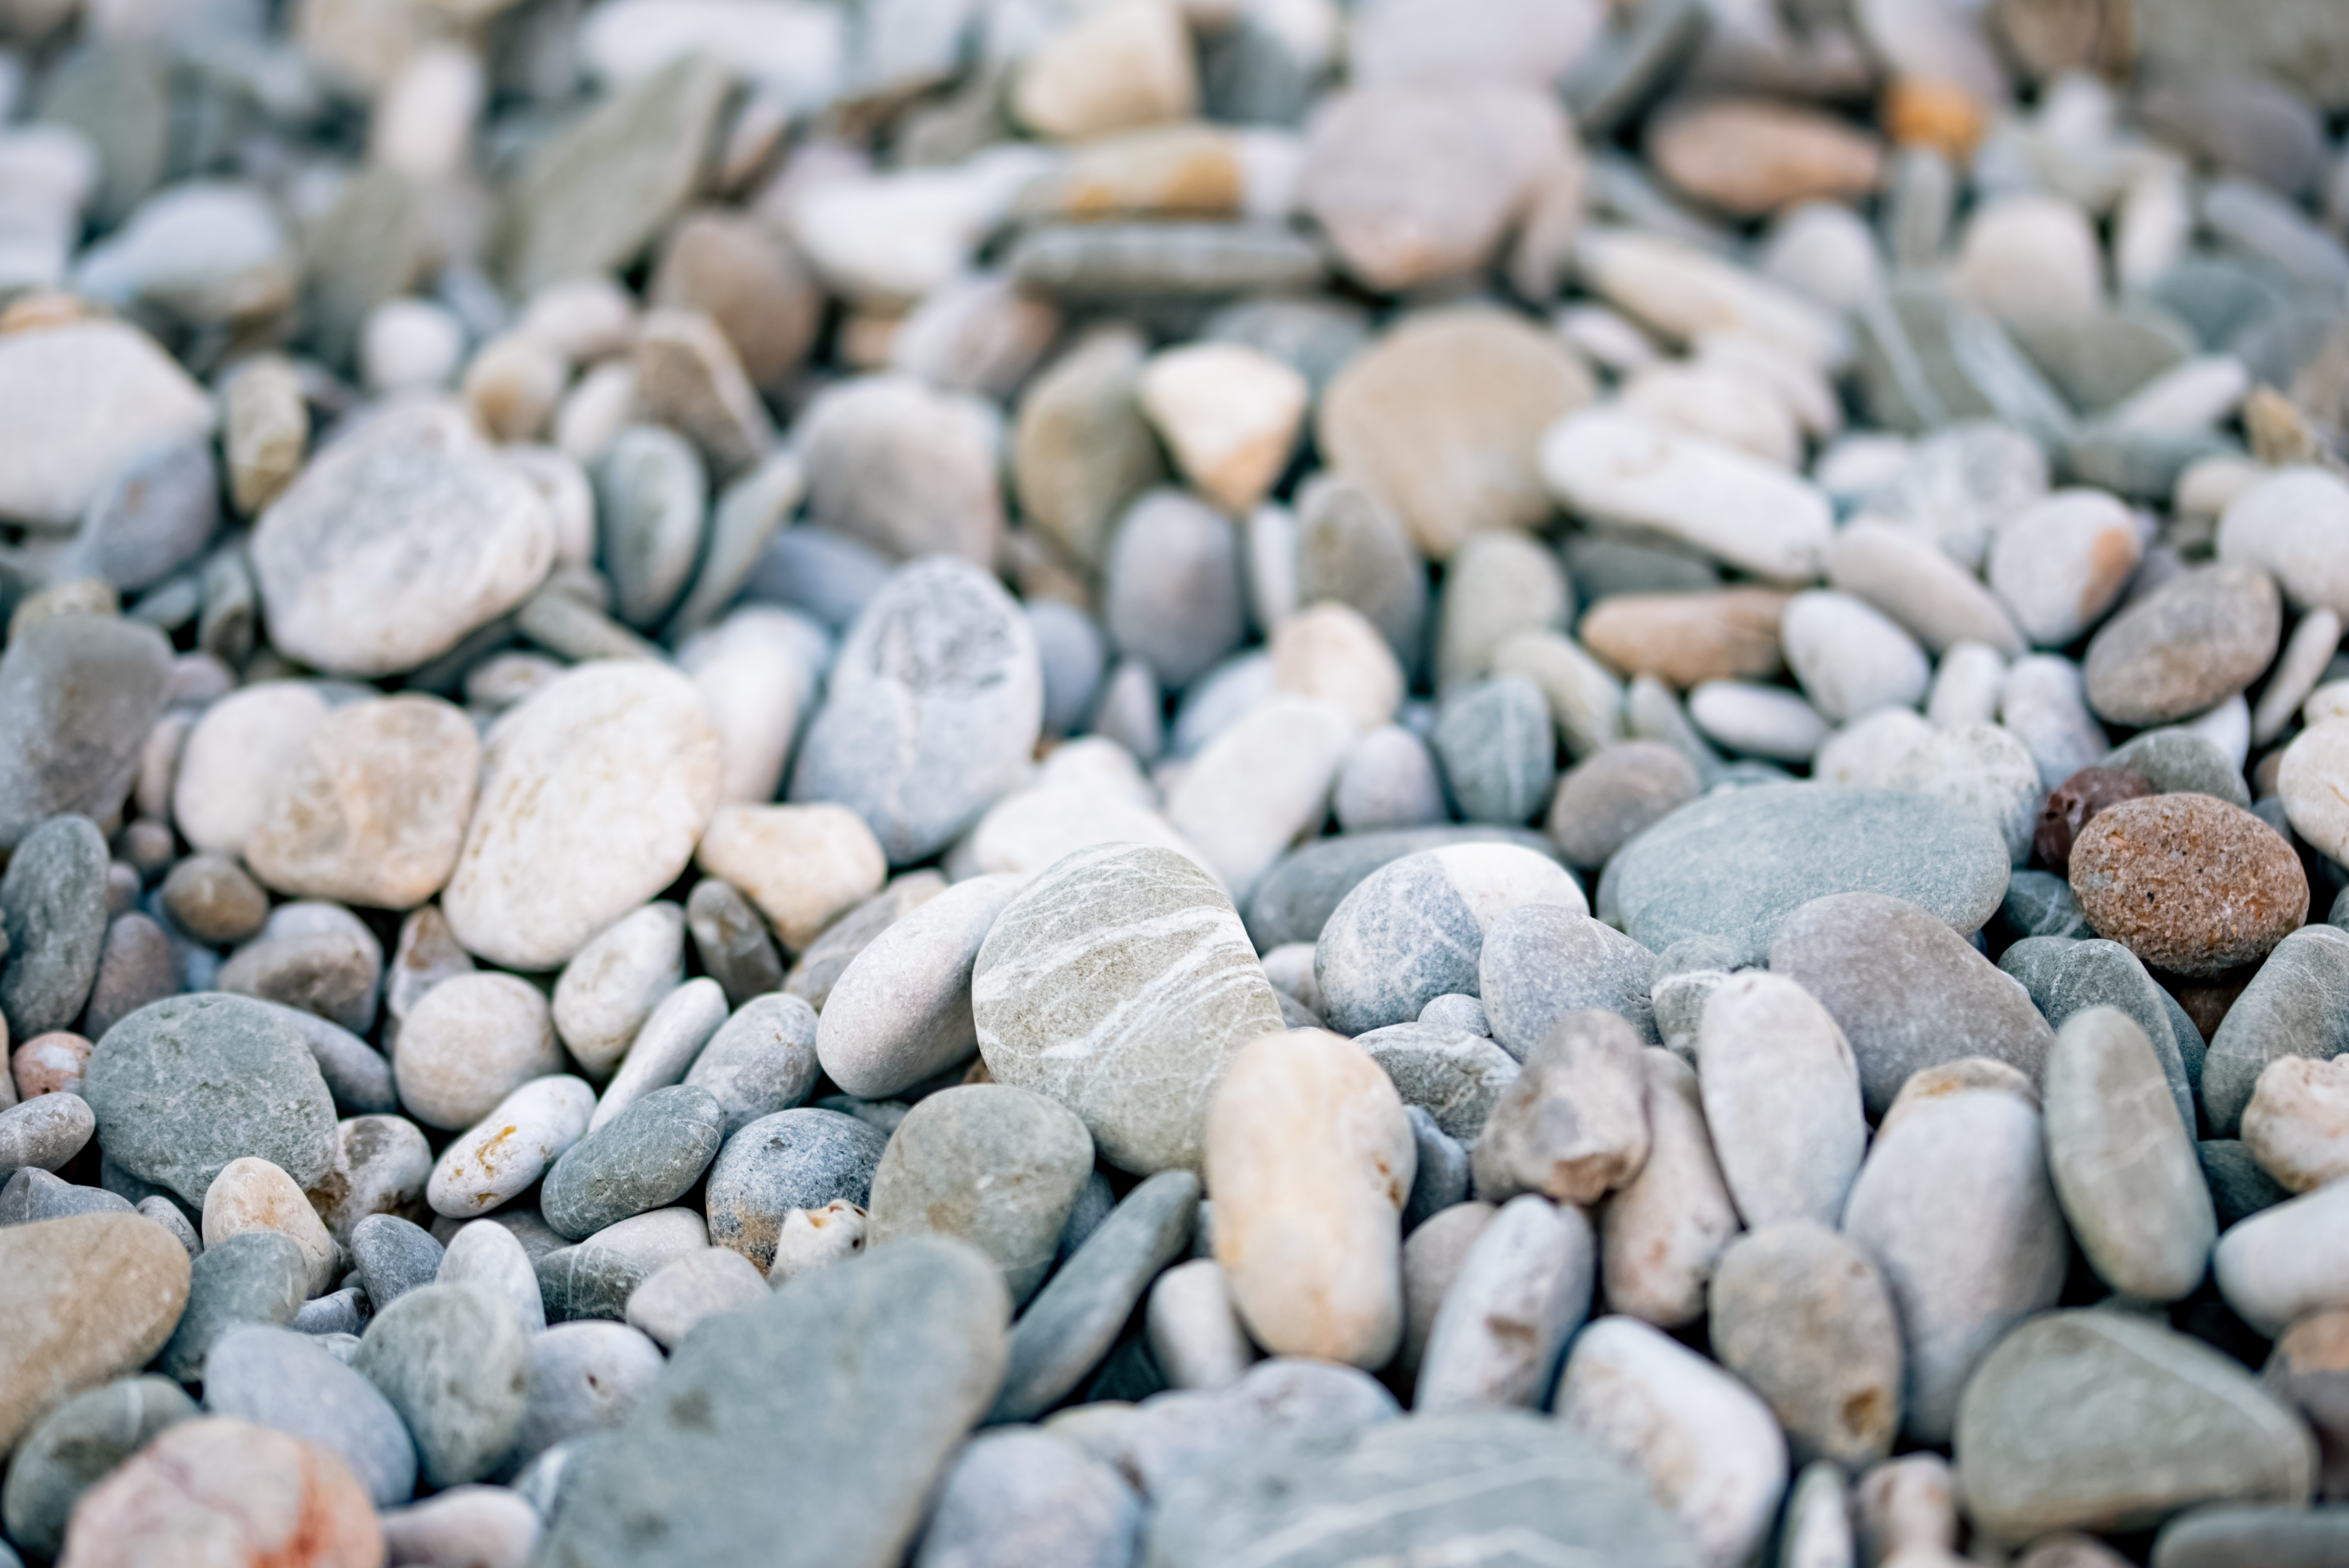 82372 download wallpaper stones, pebble, beach, macro, grey screensavers and pictures for free